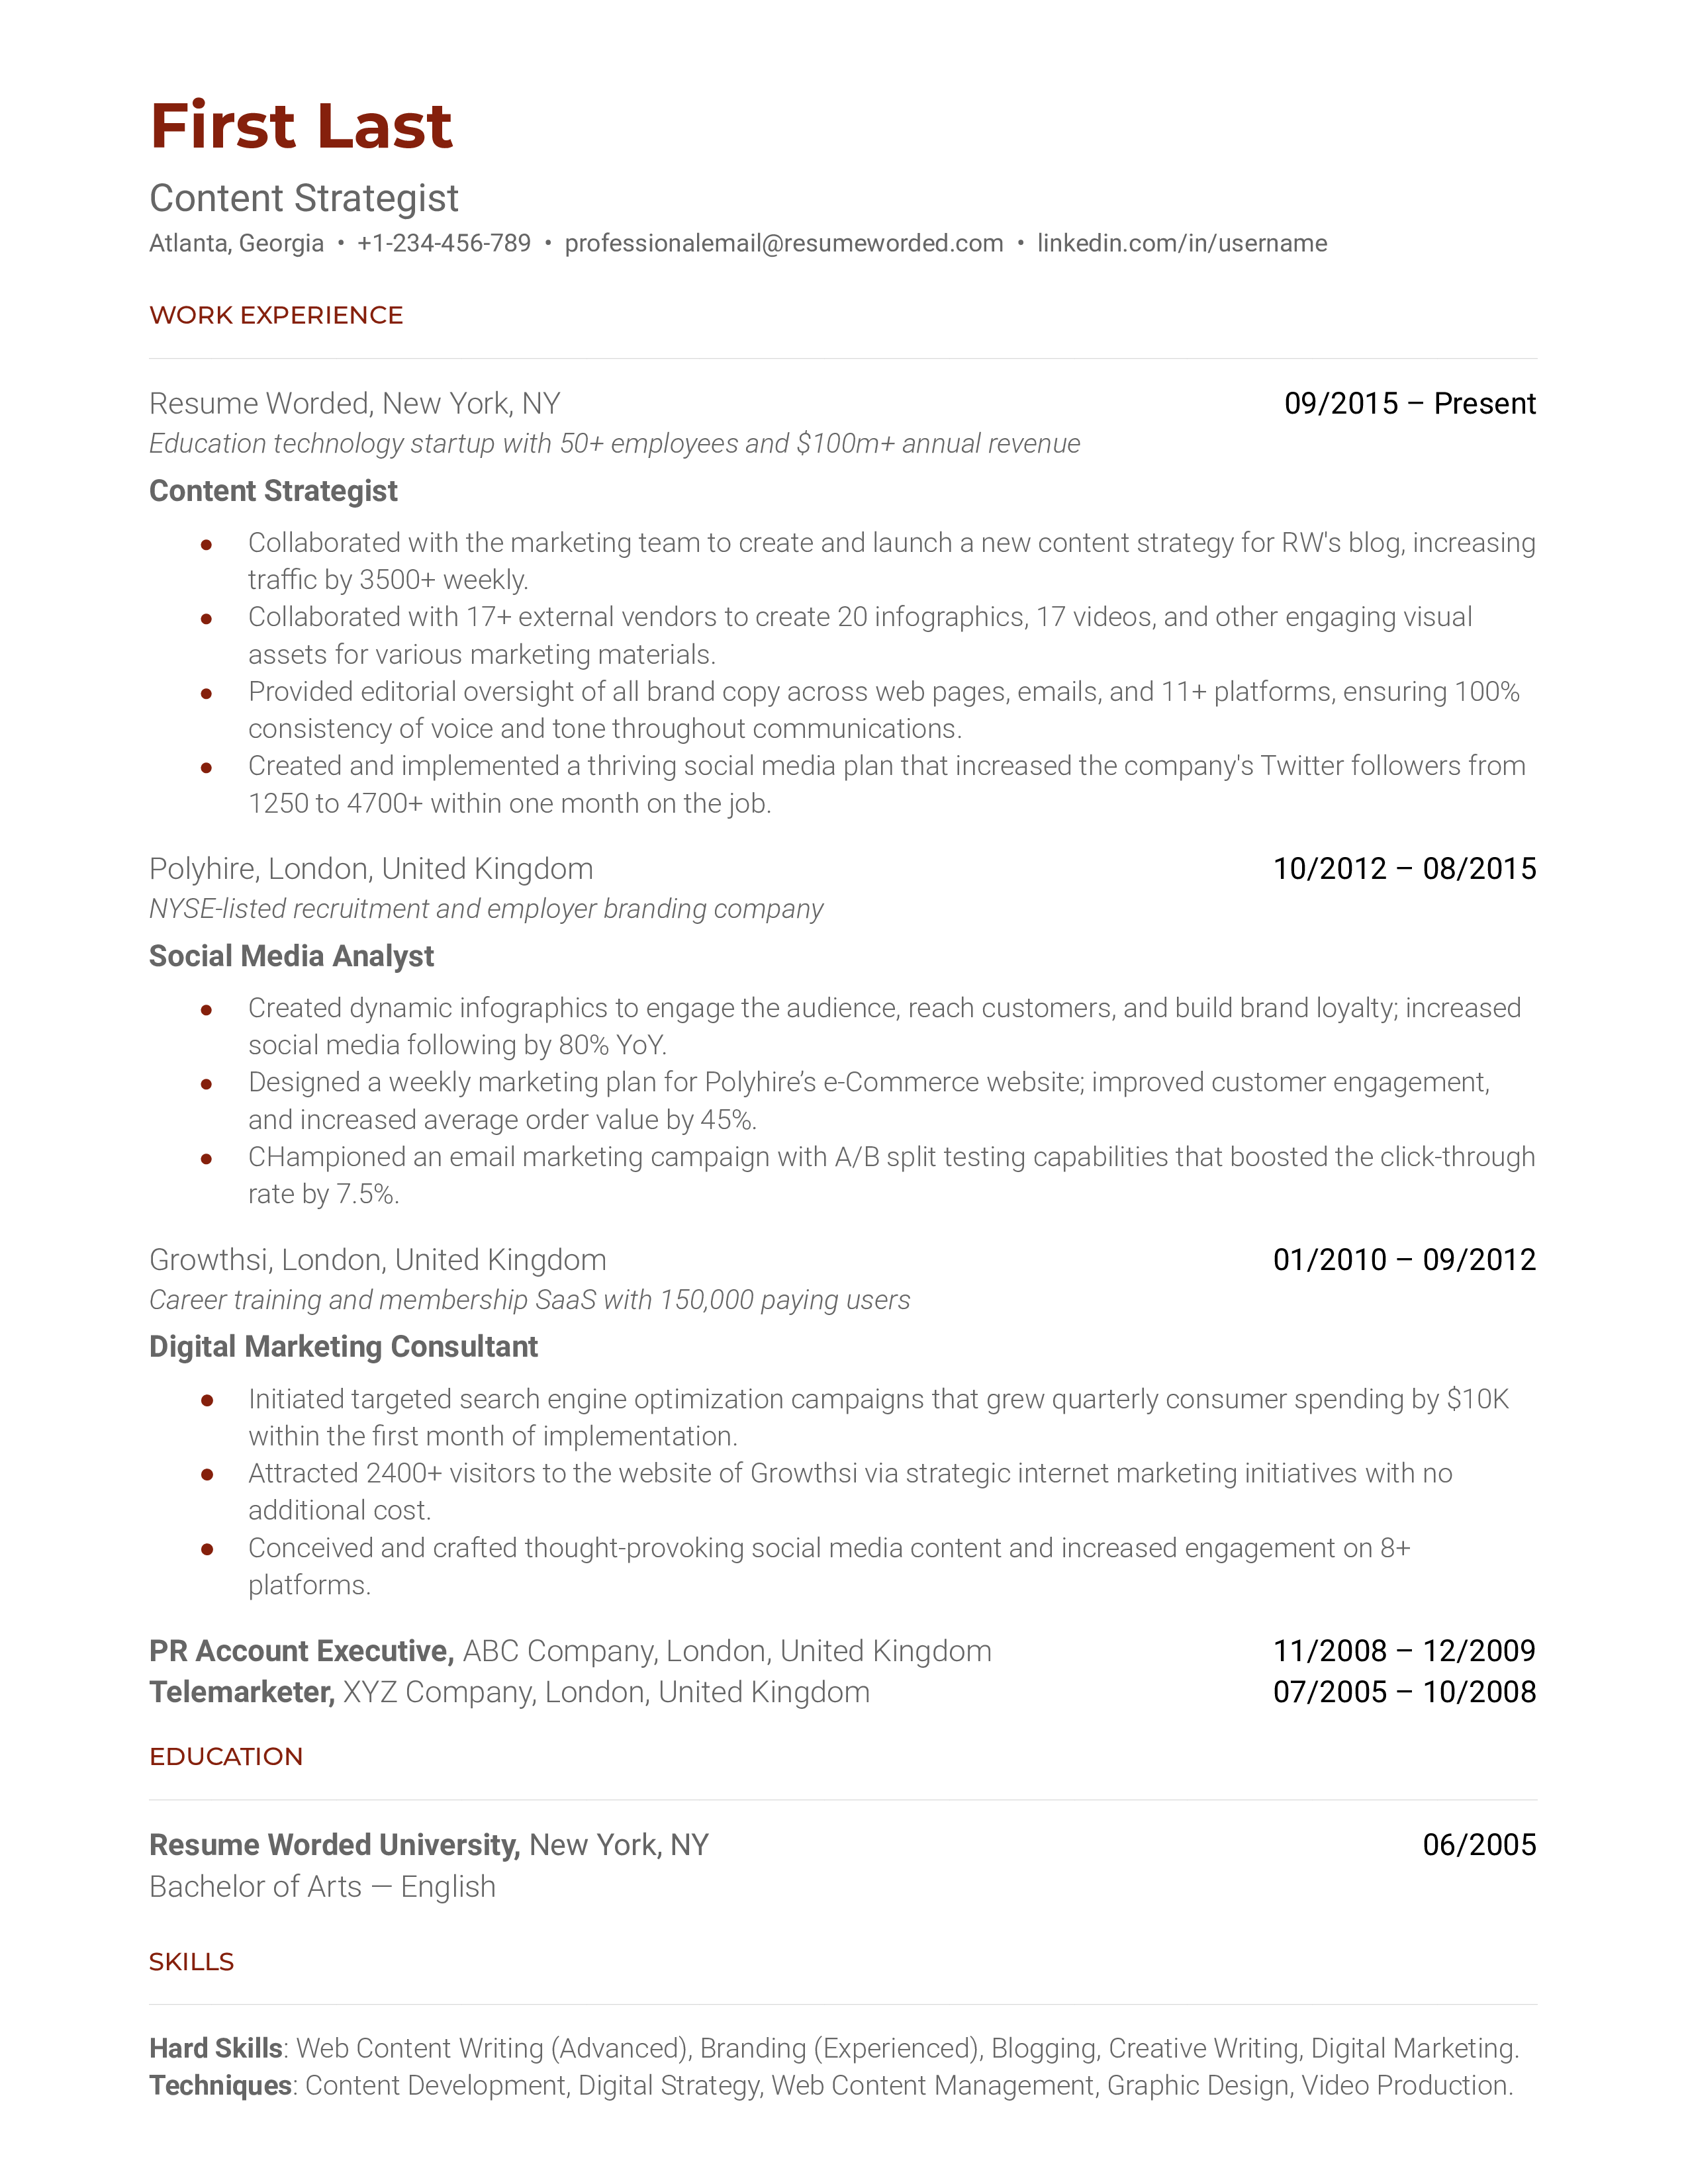 A resume for a content strategist with a BA in English and experience as a social media analyst and digital marketing consultant.